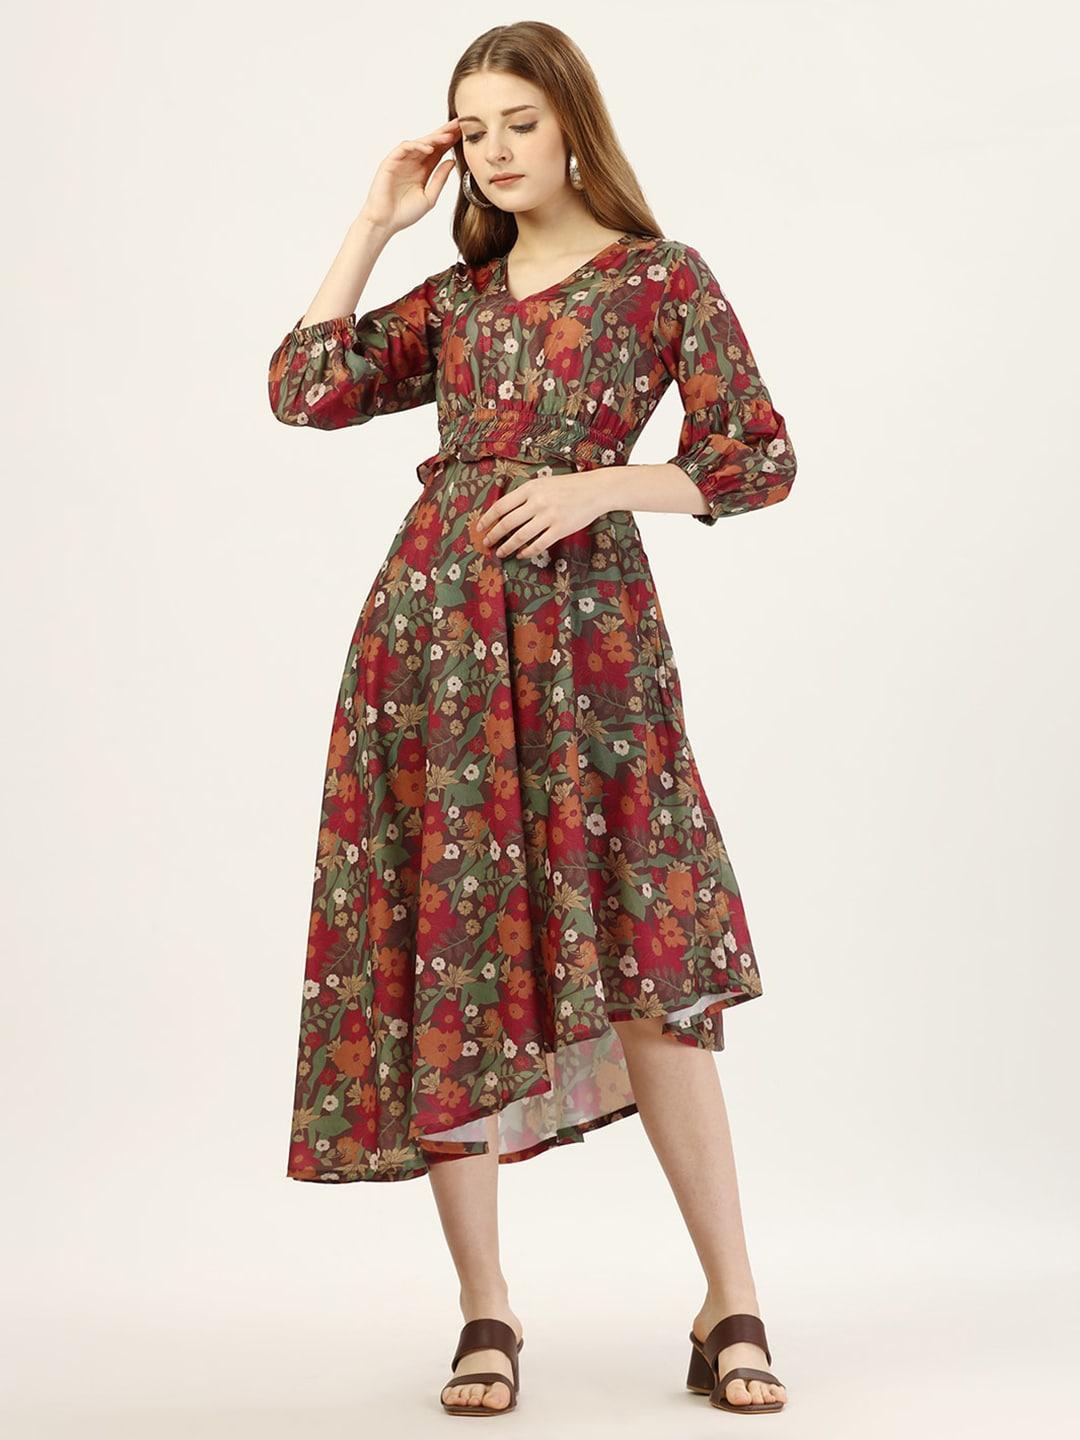 SEW YOU SOON Floral Printed Puff Sleeves Fit & Flare Midi Dress